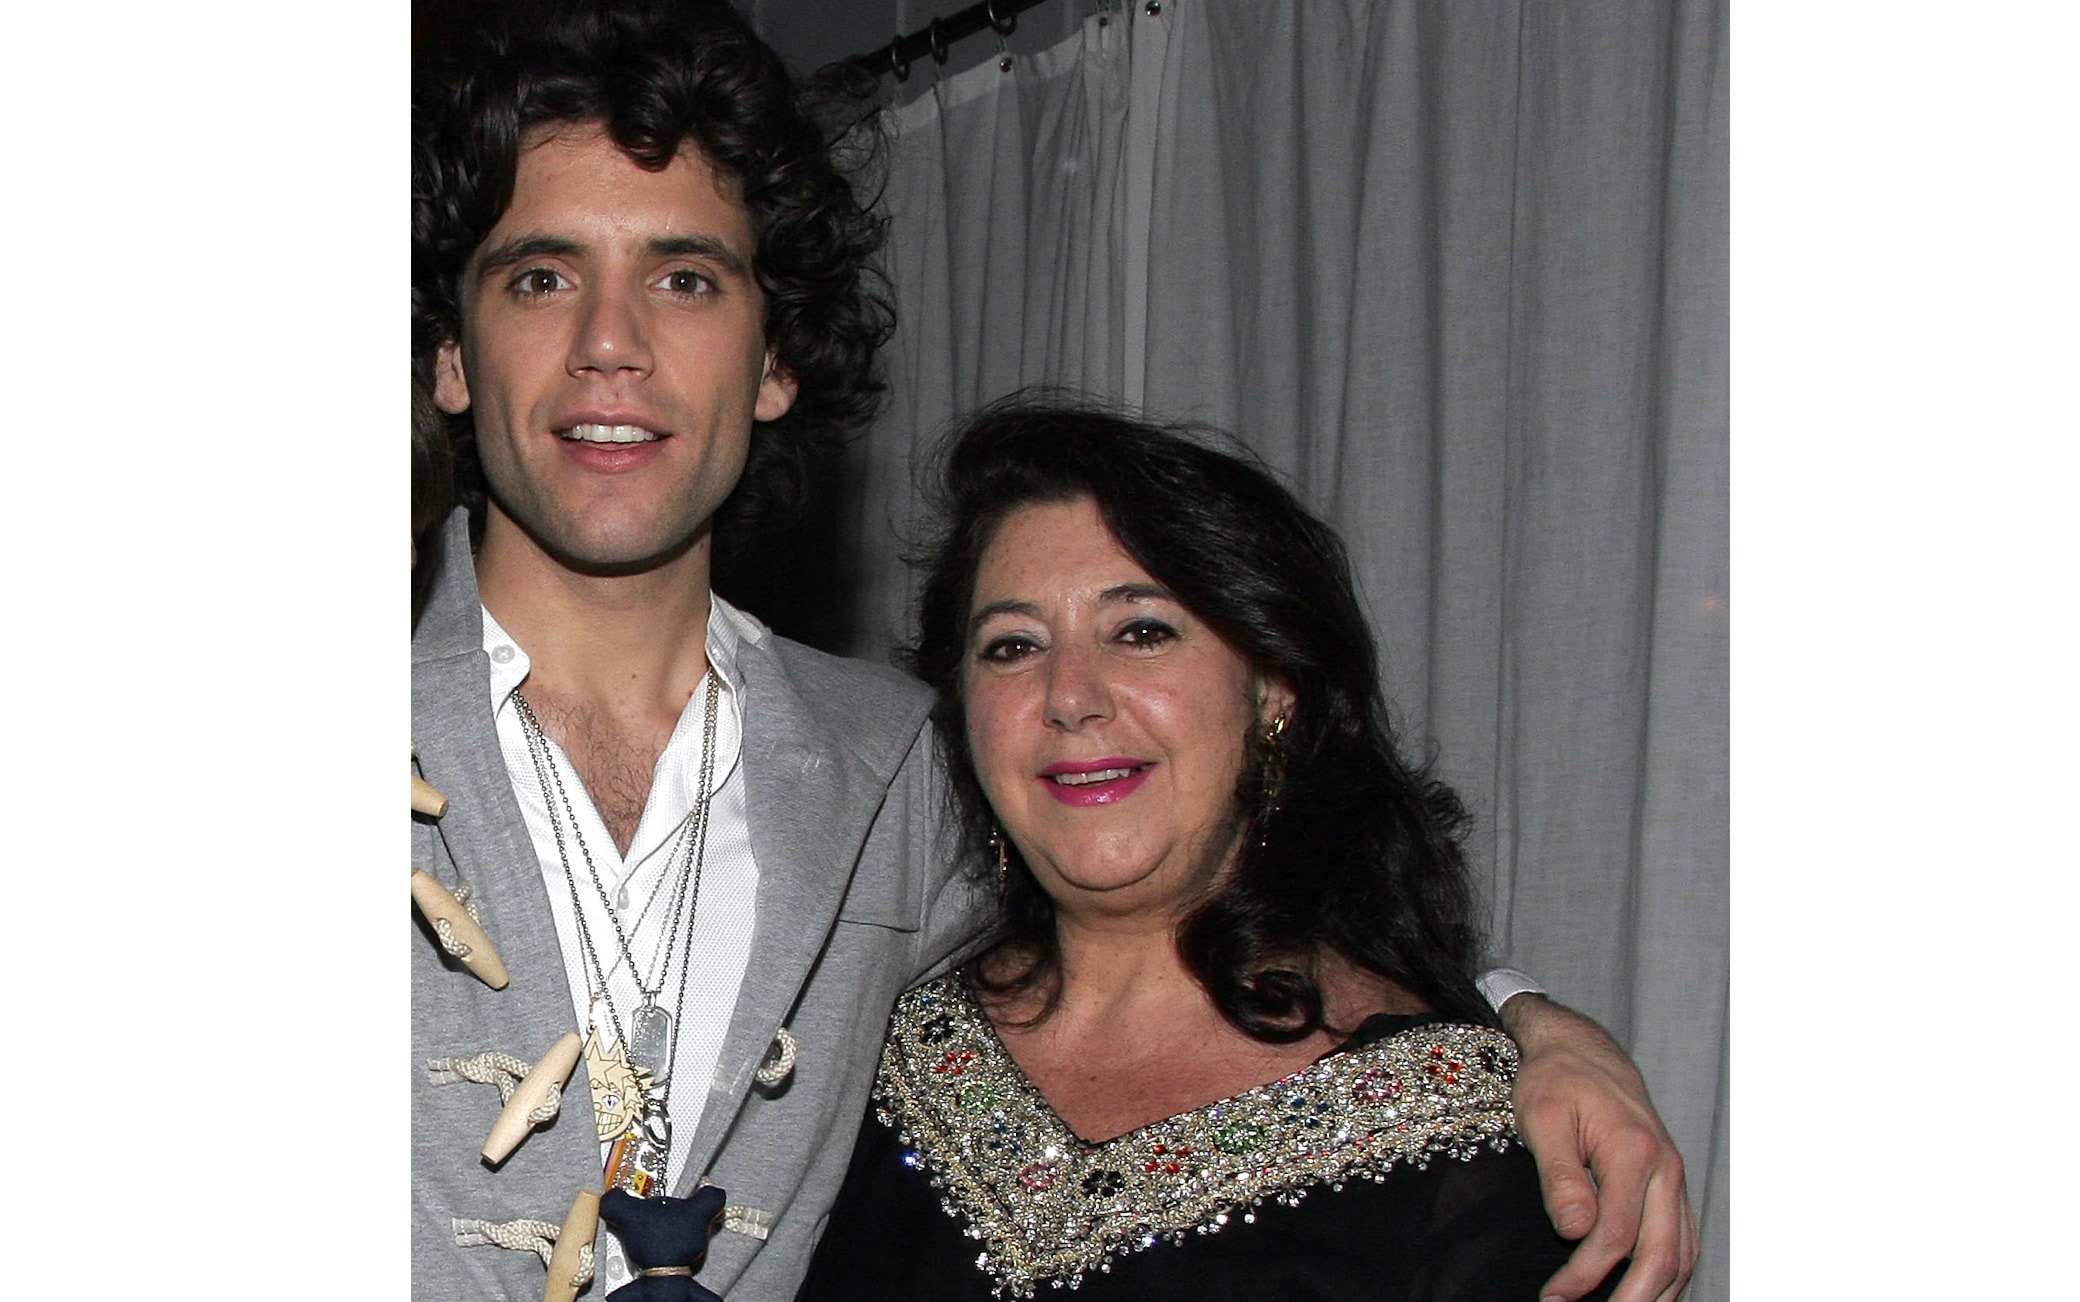 LOS ANGELES, CA - MARCH 27:  Mika with his sister, Yasmine (L) and his mother attend Mika's CD release party at the Sky Bar on March 27, 2007 in Los Angeles, California.  (Photo by Marsaili McGrath/Getty Images for Universal Music)